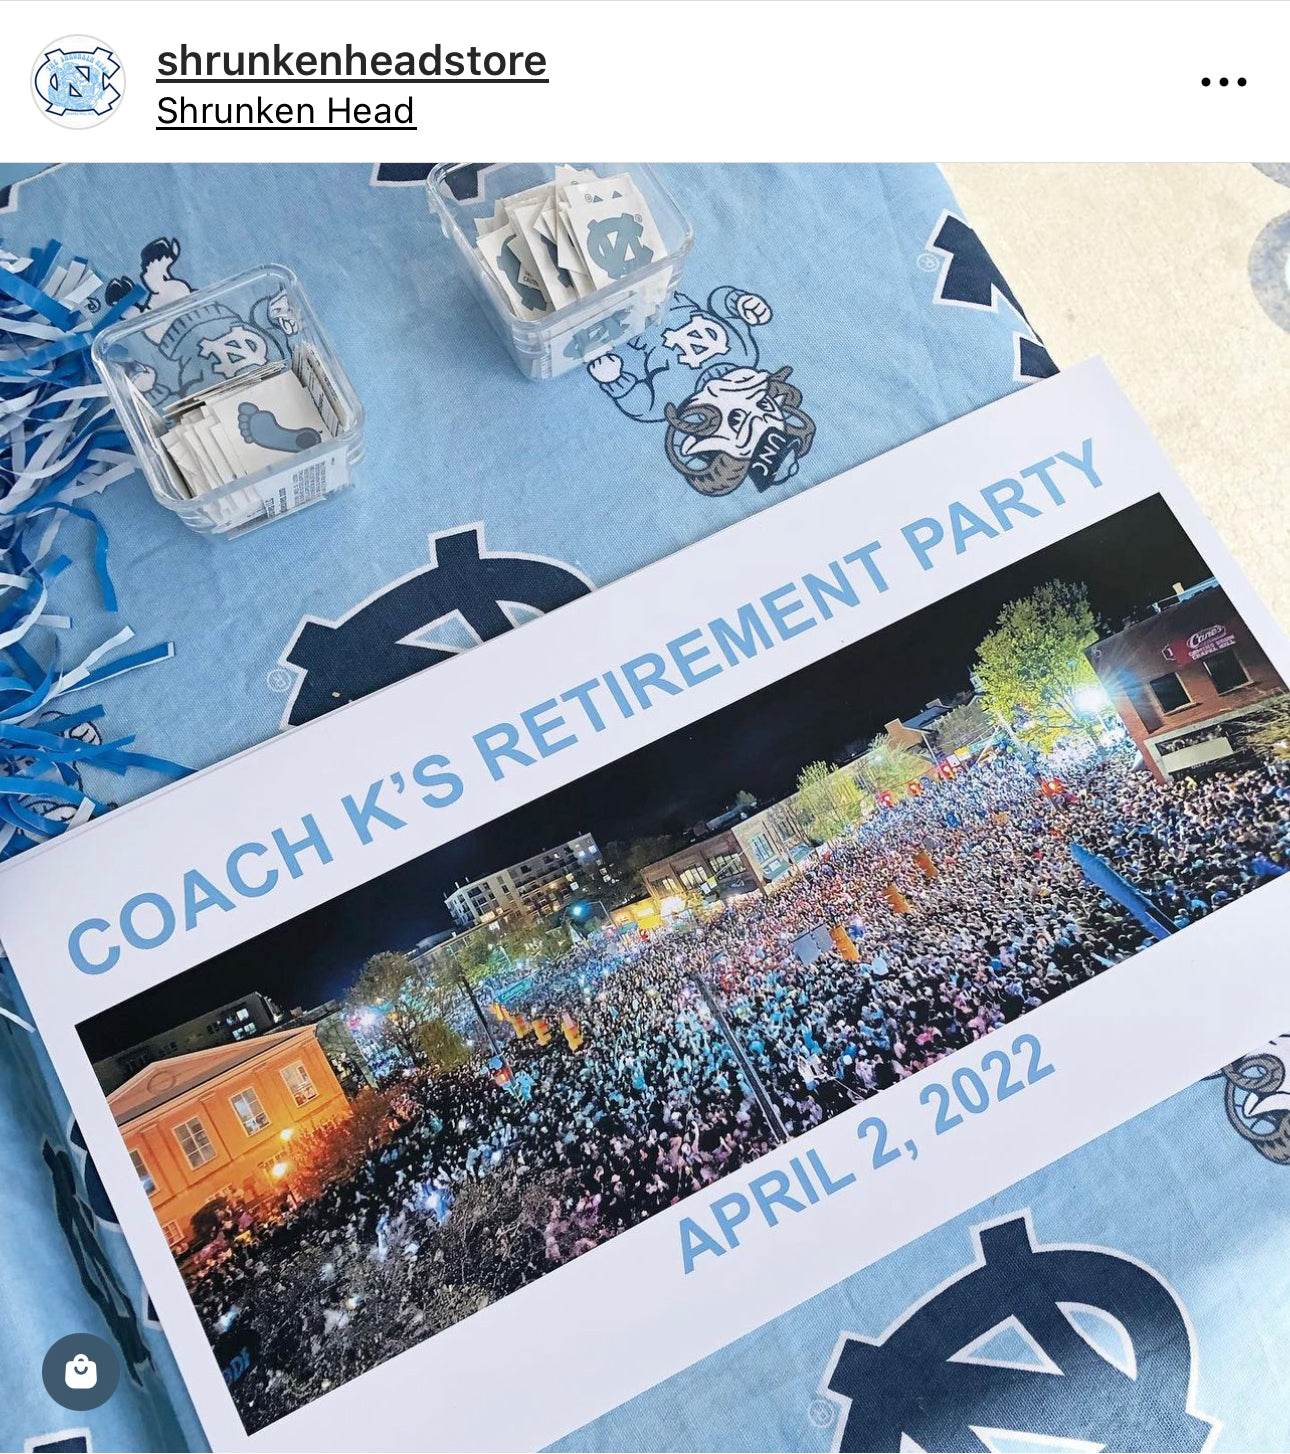 Coach K's Retirement Party on Franklin Street Poster